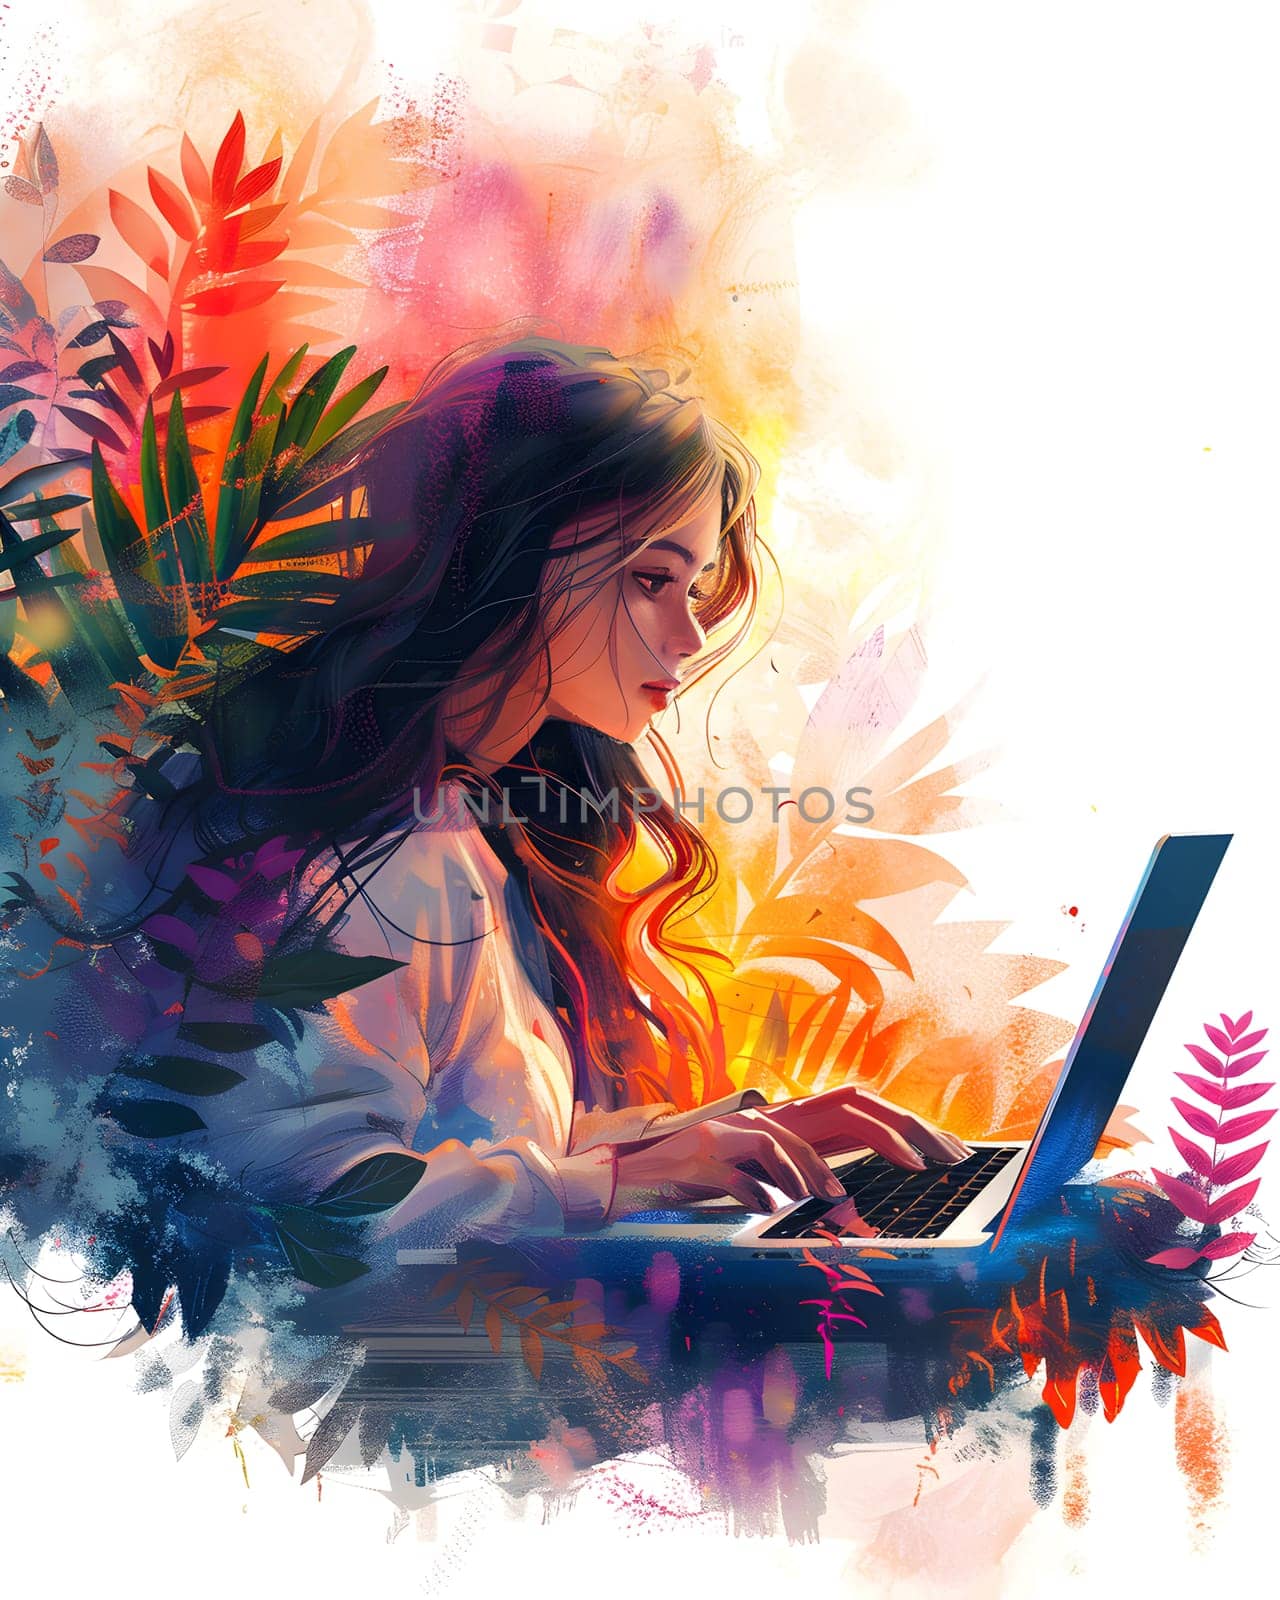 A happy woman painting under a tree with a laptop in an outdoor art event by Nadtochiy